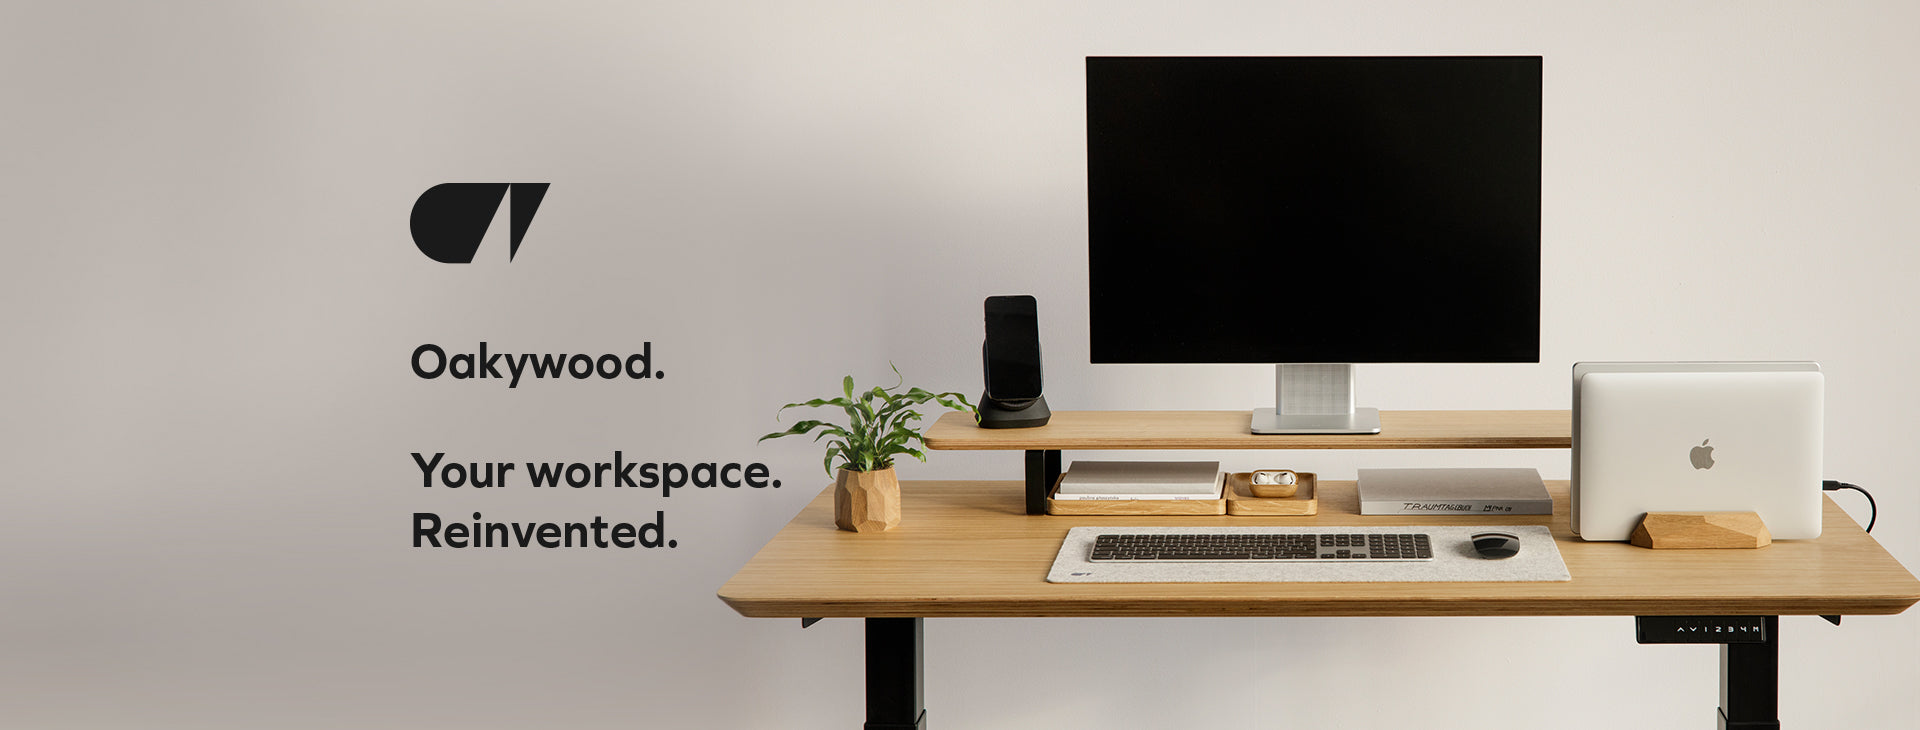 Grovemade New Desk Shelf features 2 new sizes & an upgraded design for more  shelf space » Gadget Flow